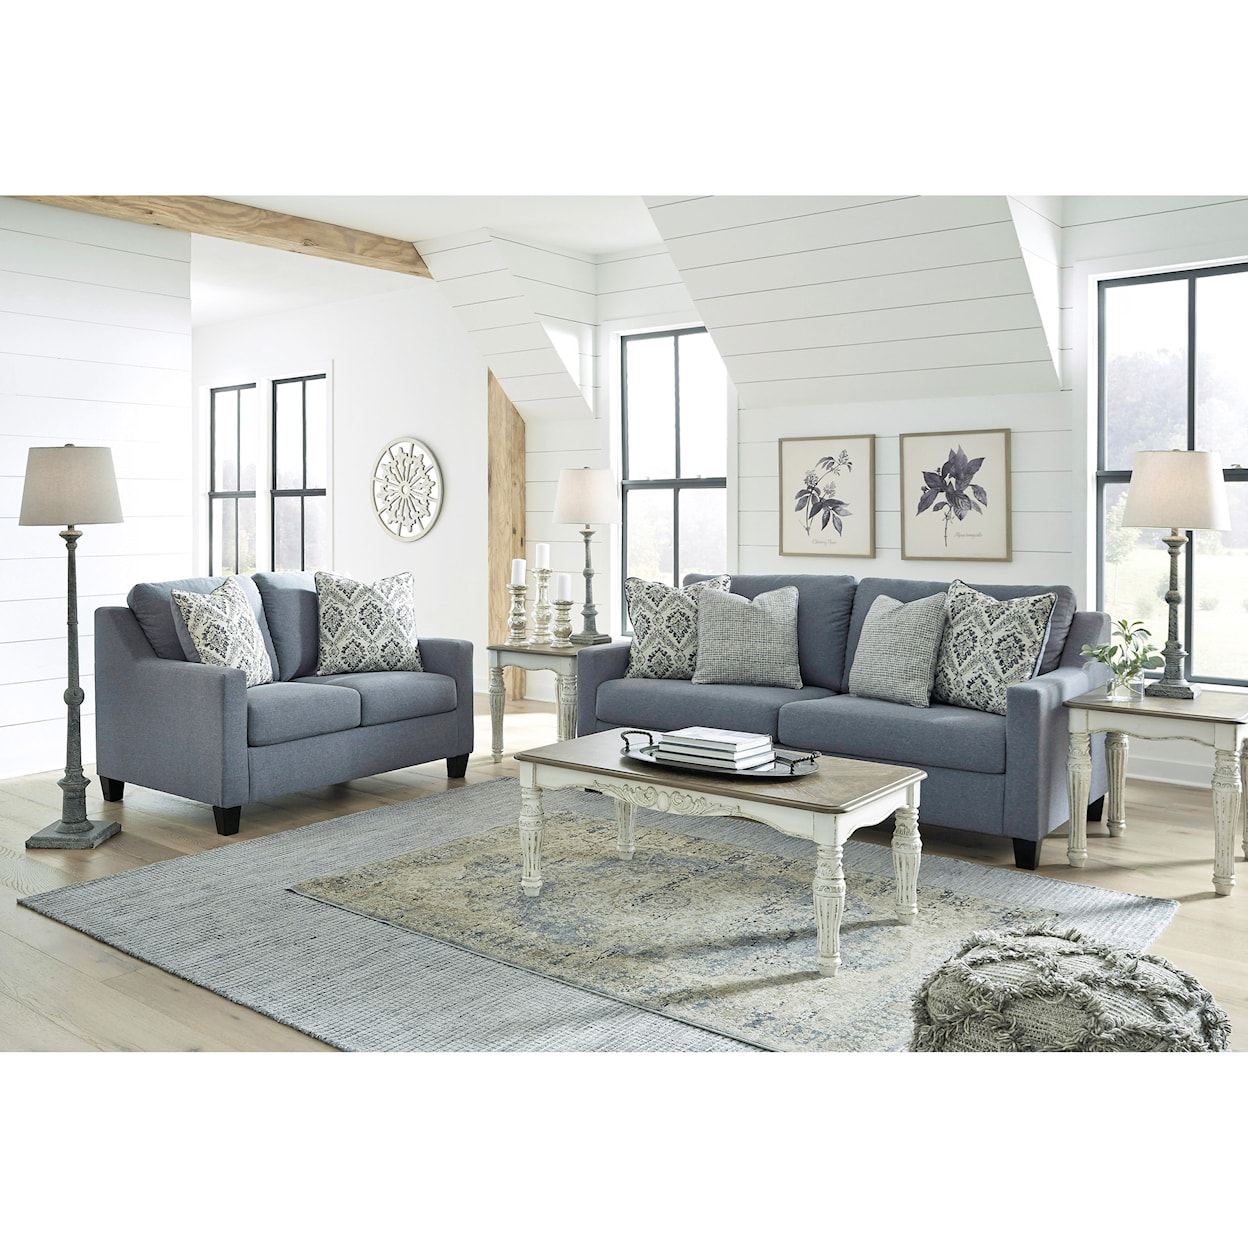 Benchcraft Lemly 3670238 Contemporary Sofa in Blue Fabric | Standard ...